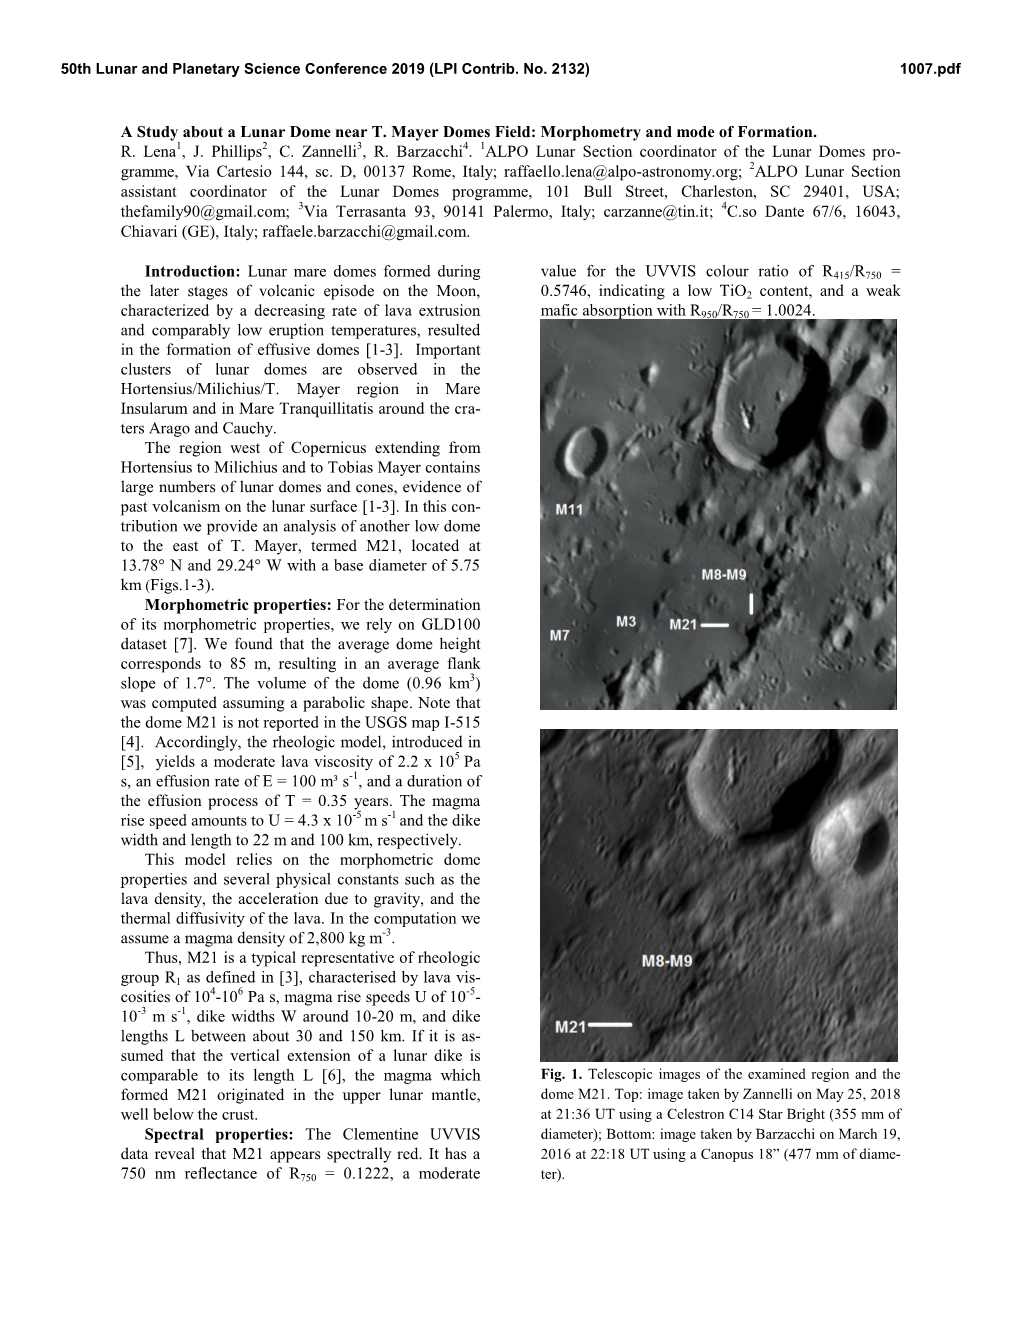 A Study About a Lunar Dome Near T. Mayer Domes Field: Morphometry and Mode of Formation